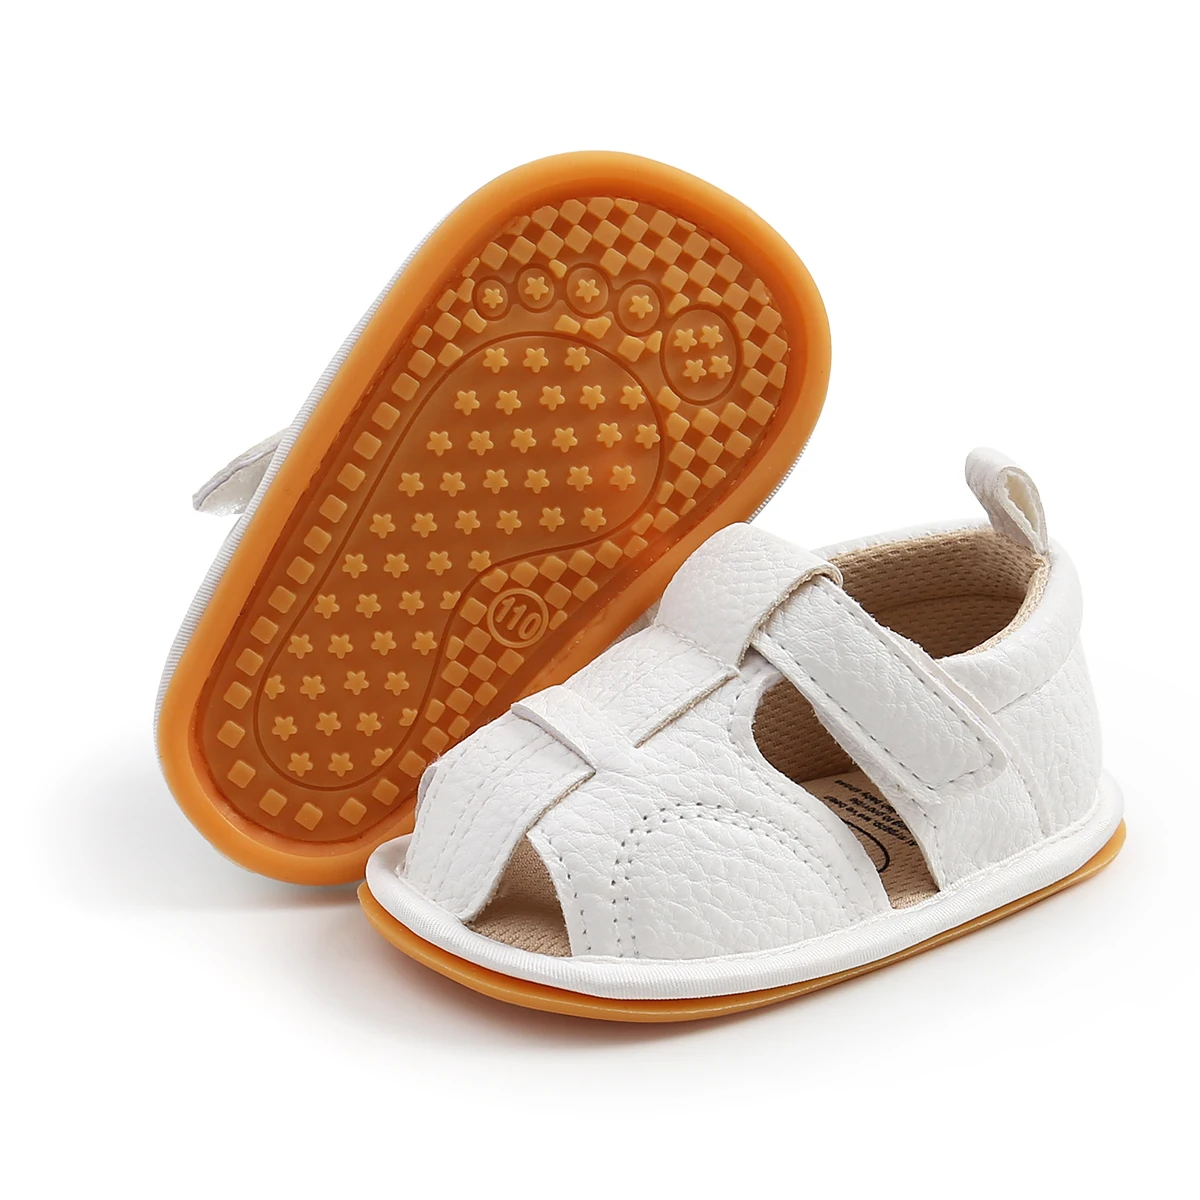 Infant Baby Sandals & Slippers Non-Slip PU Leather Soles For Comfort and Safety Baby Shoes